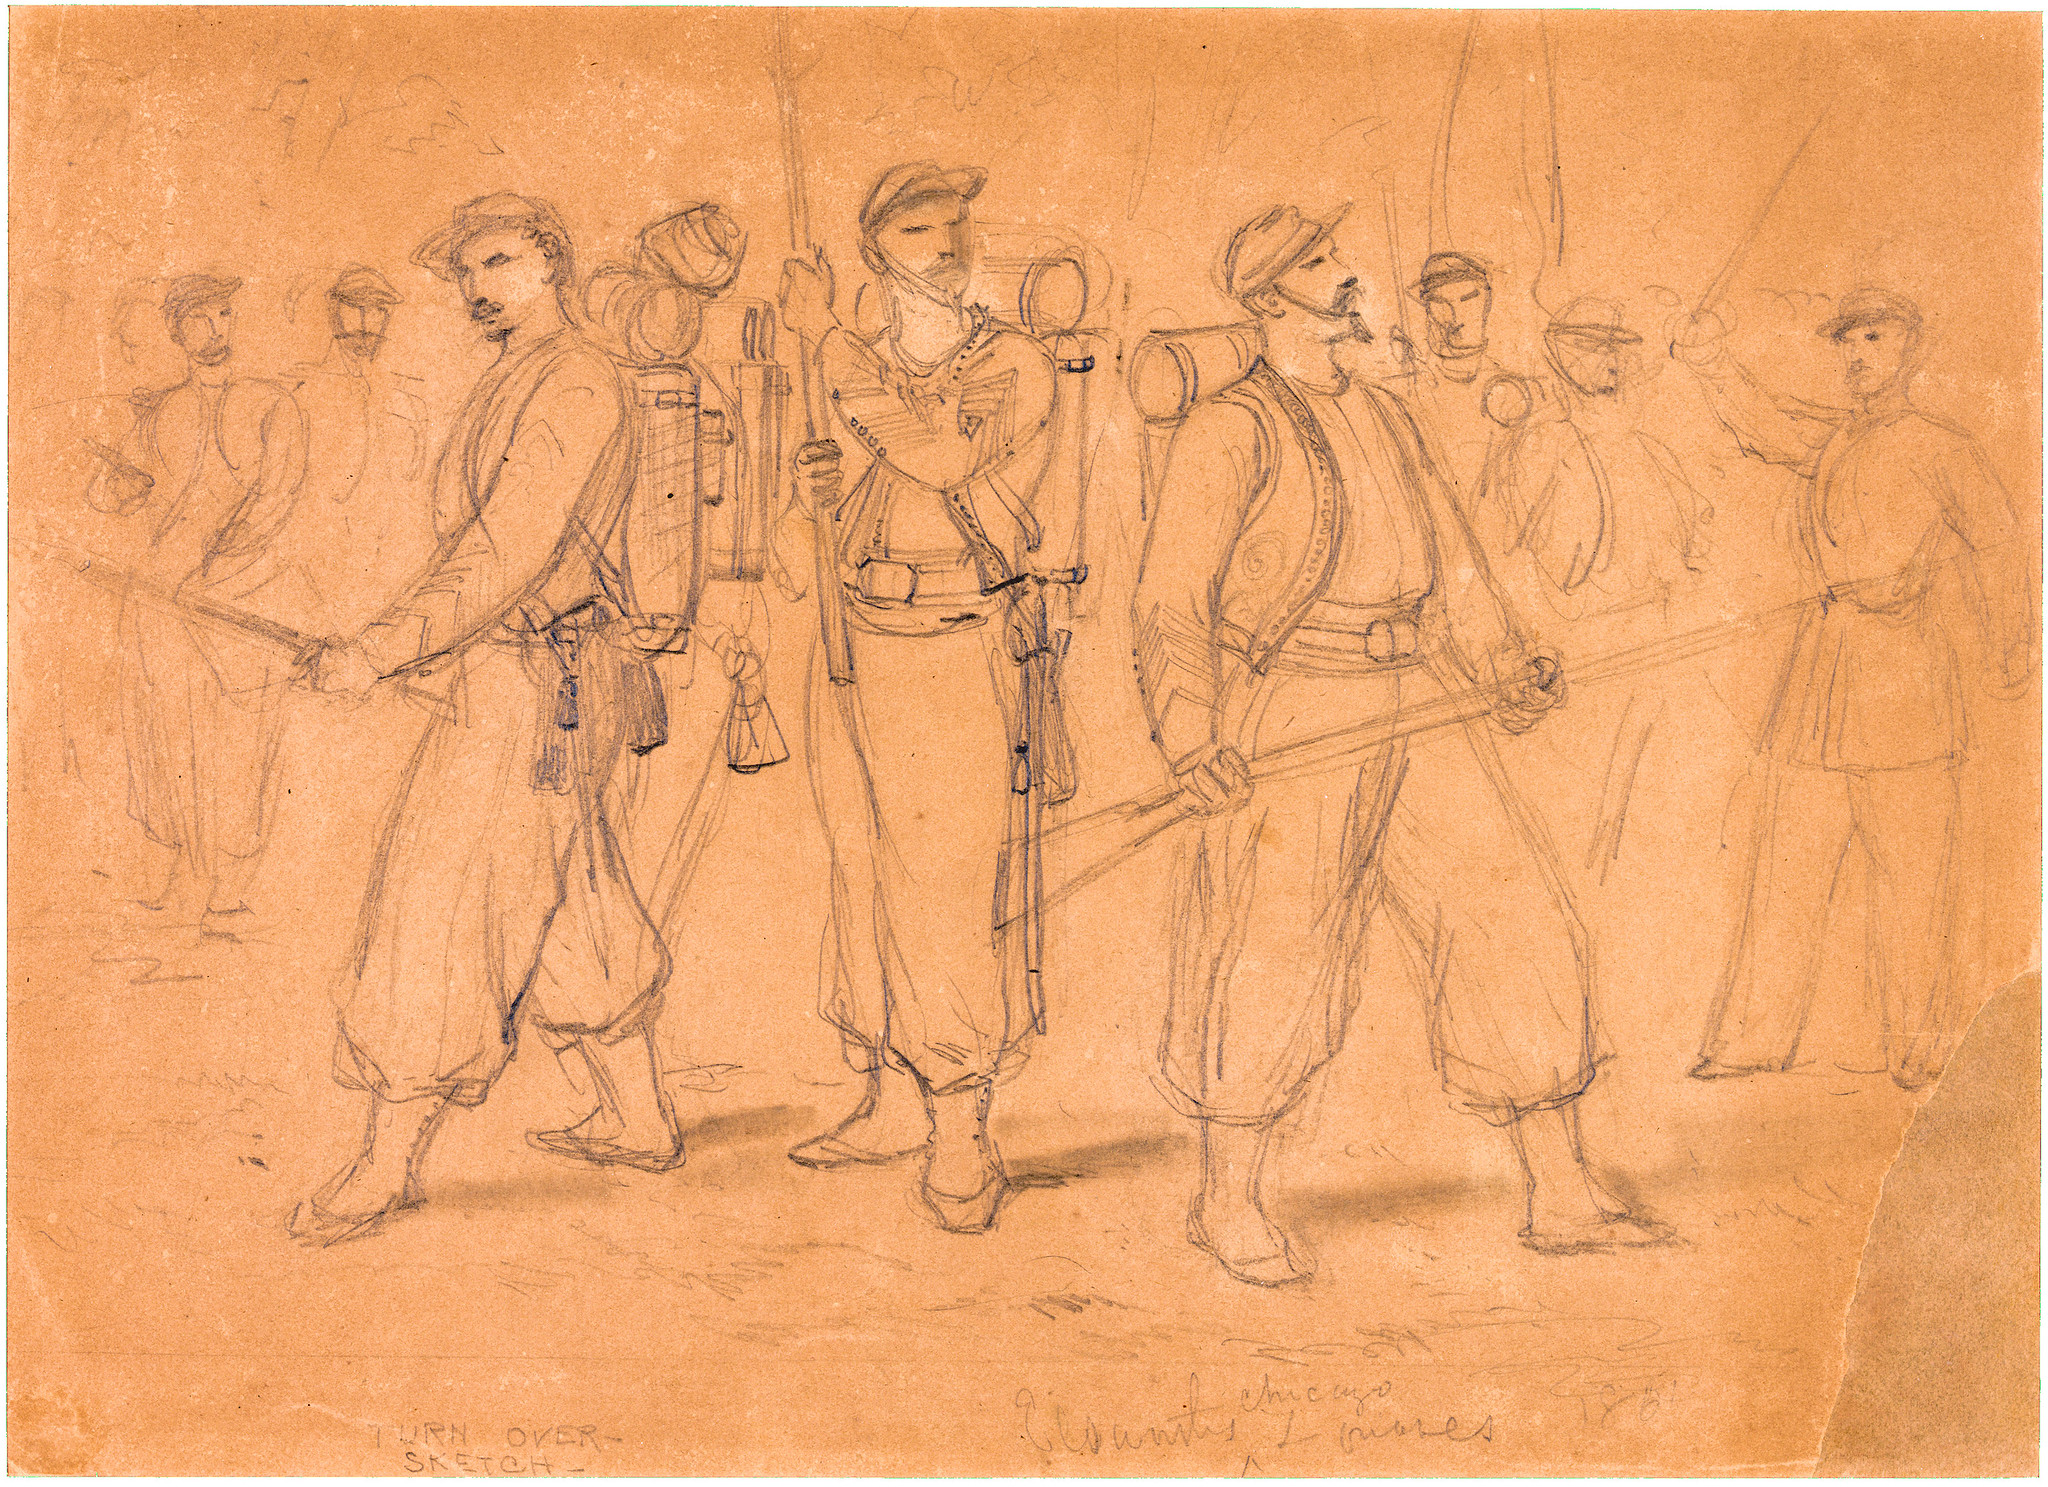 Ellsworth's Chicago Zouaves, 1861, by Alfred Waud